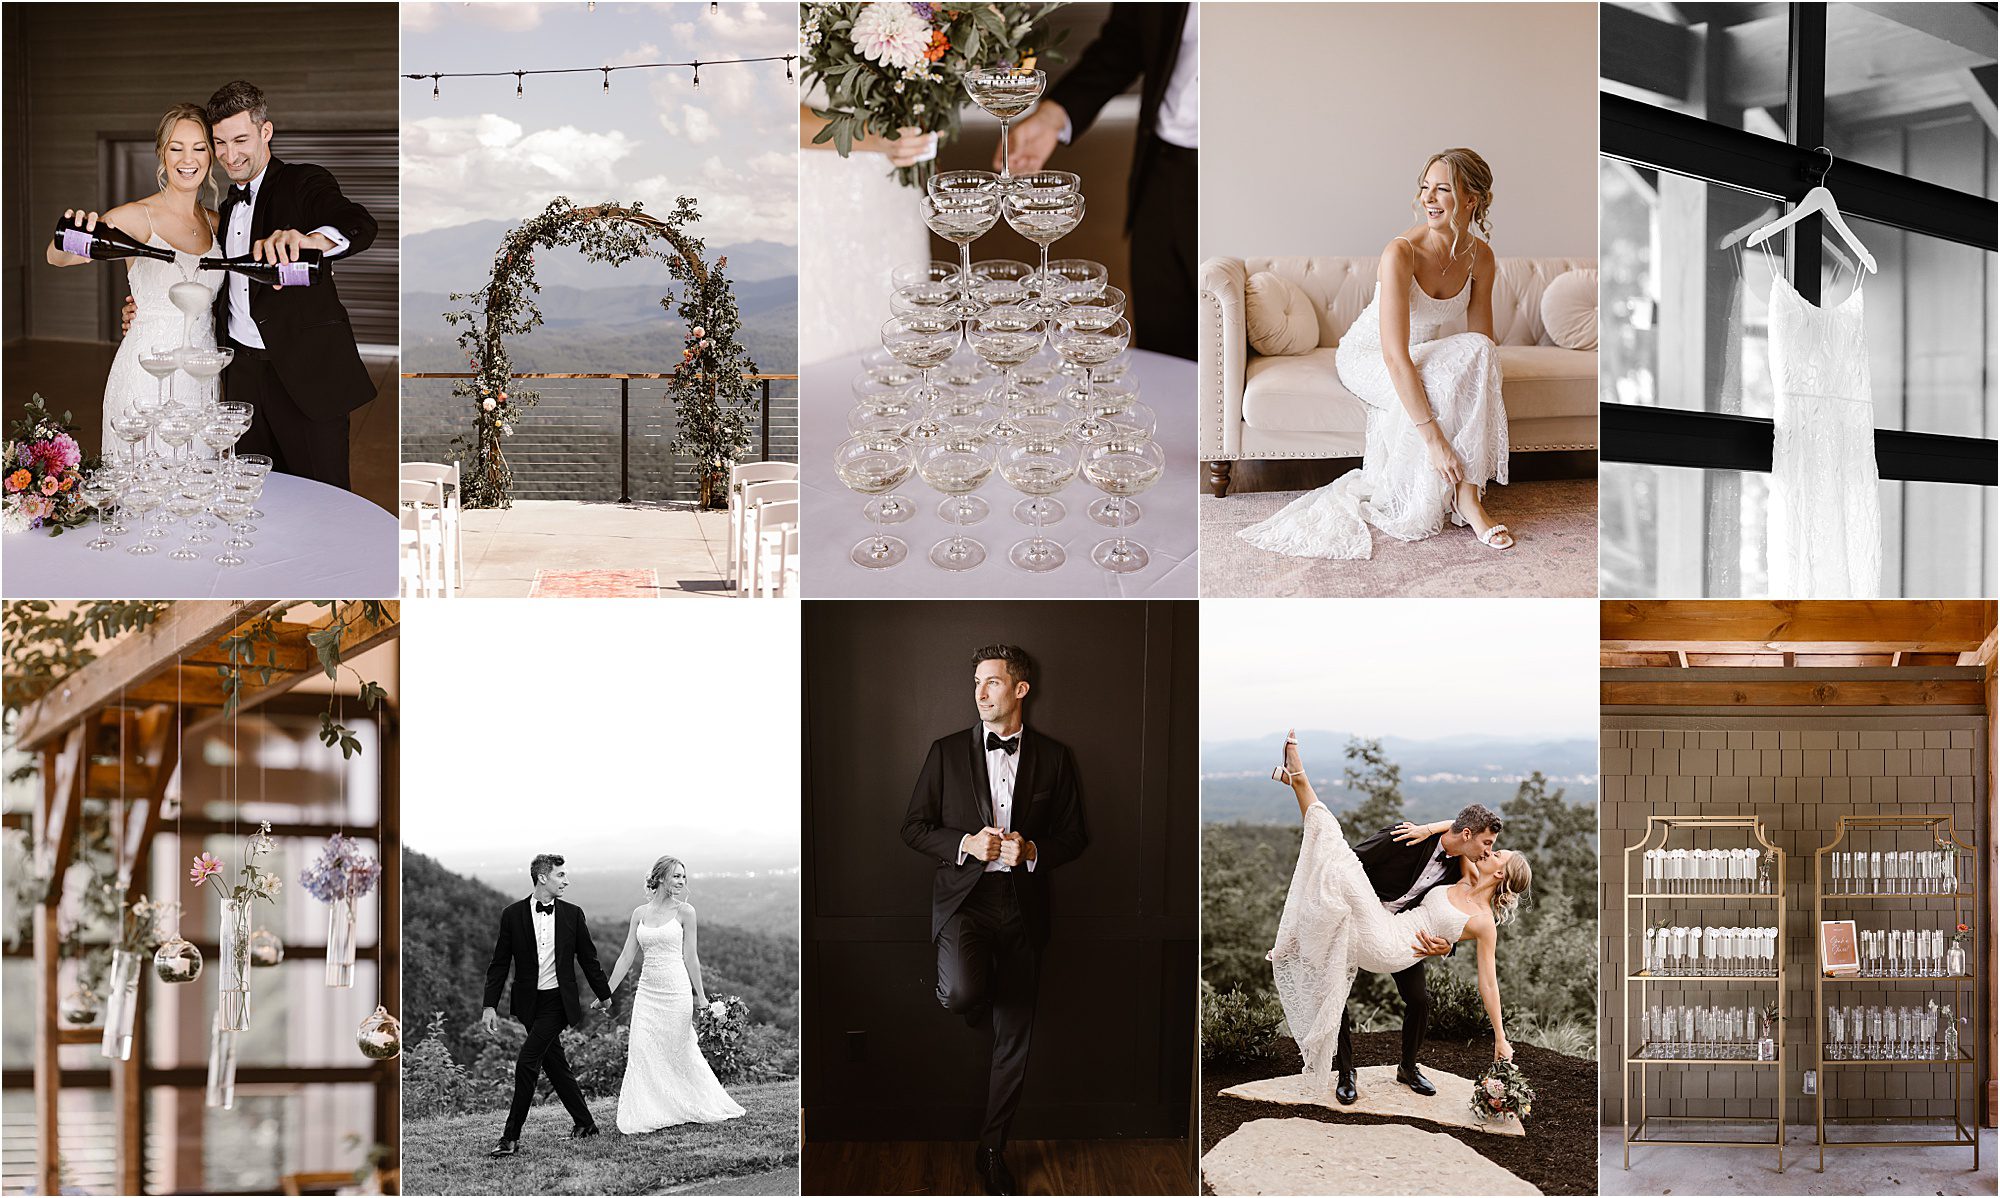 Modern Champagne-Fueled Wedding Overlooking the Smoky Mountains